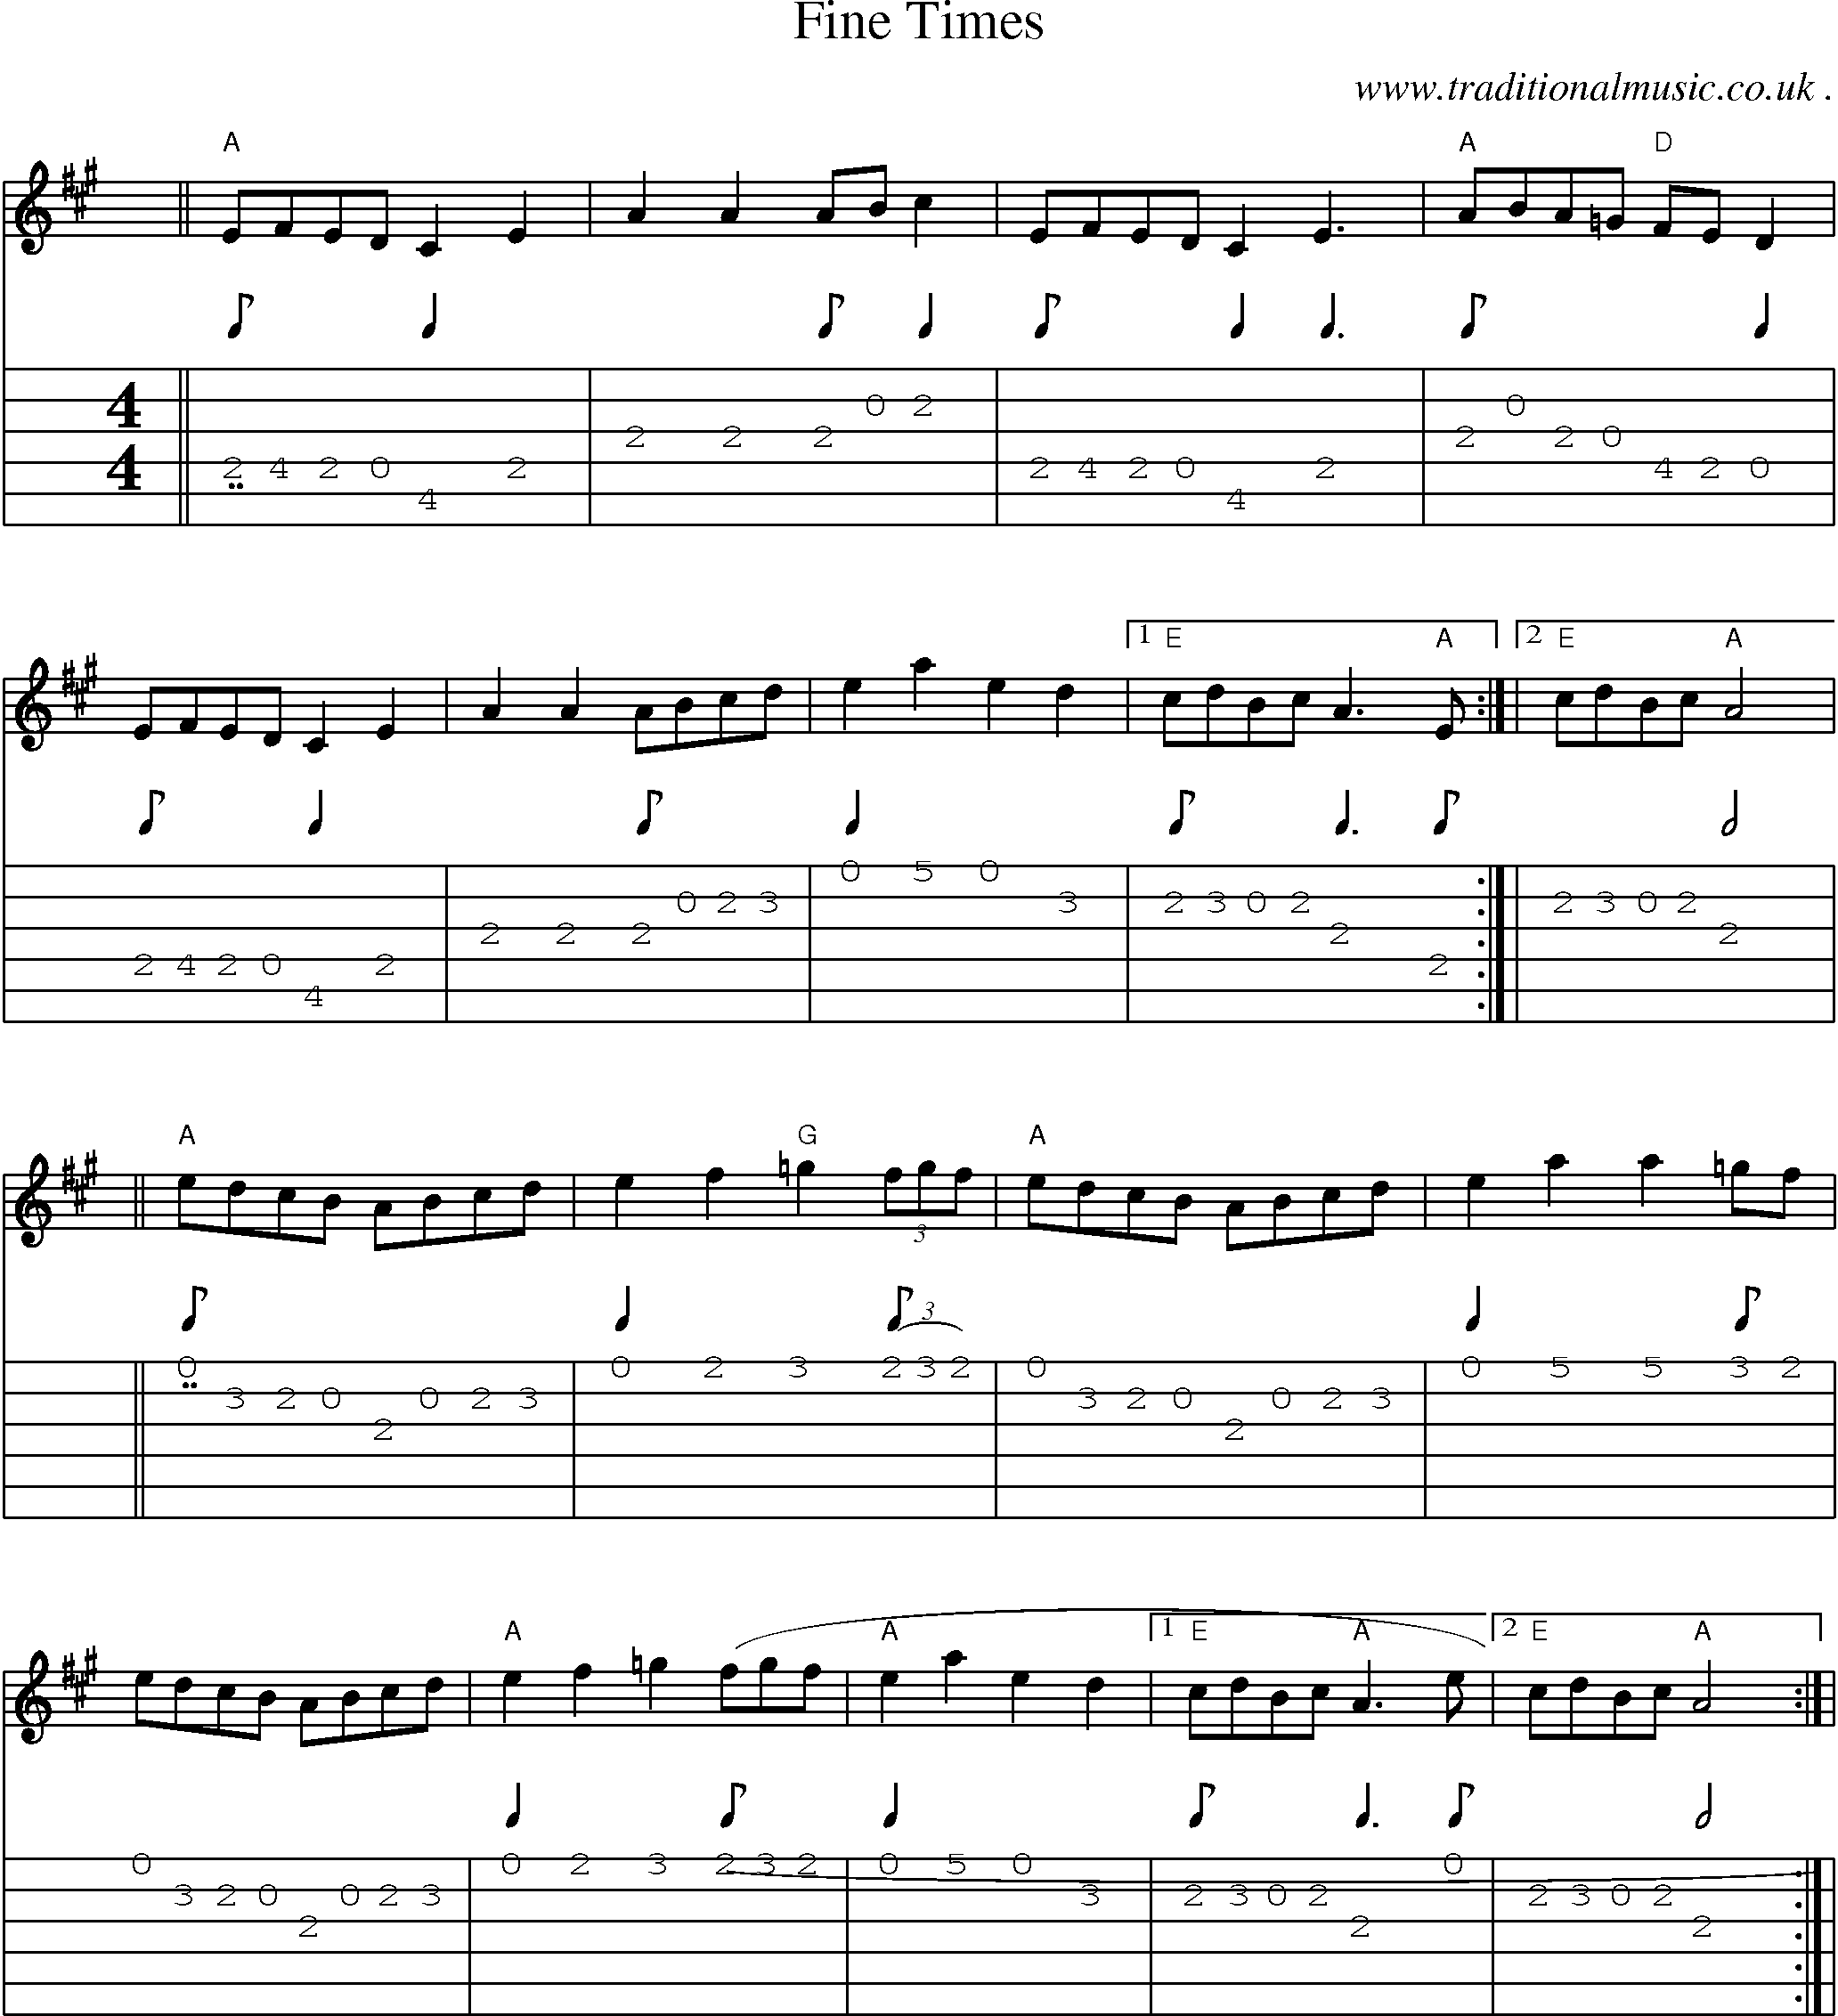 Sheet-music  score, Chords and Guitar Tabs for Fine Times